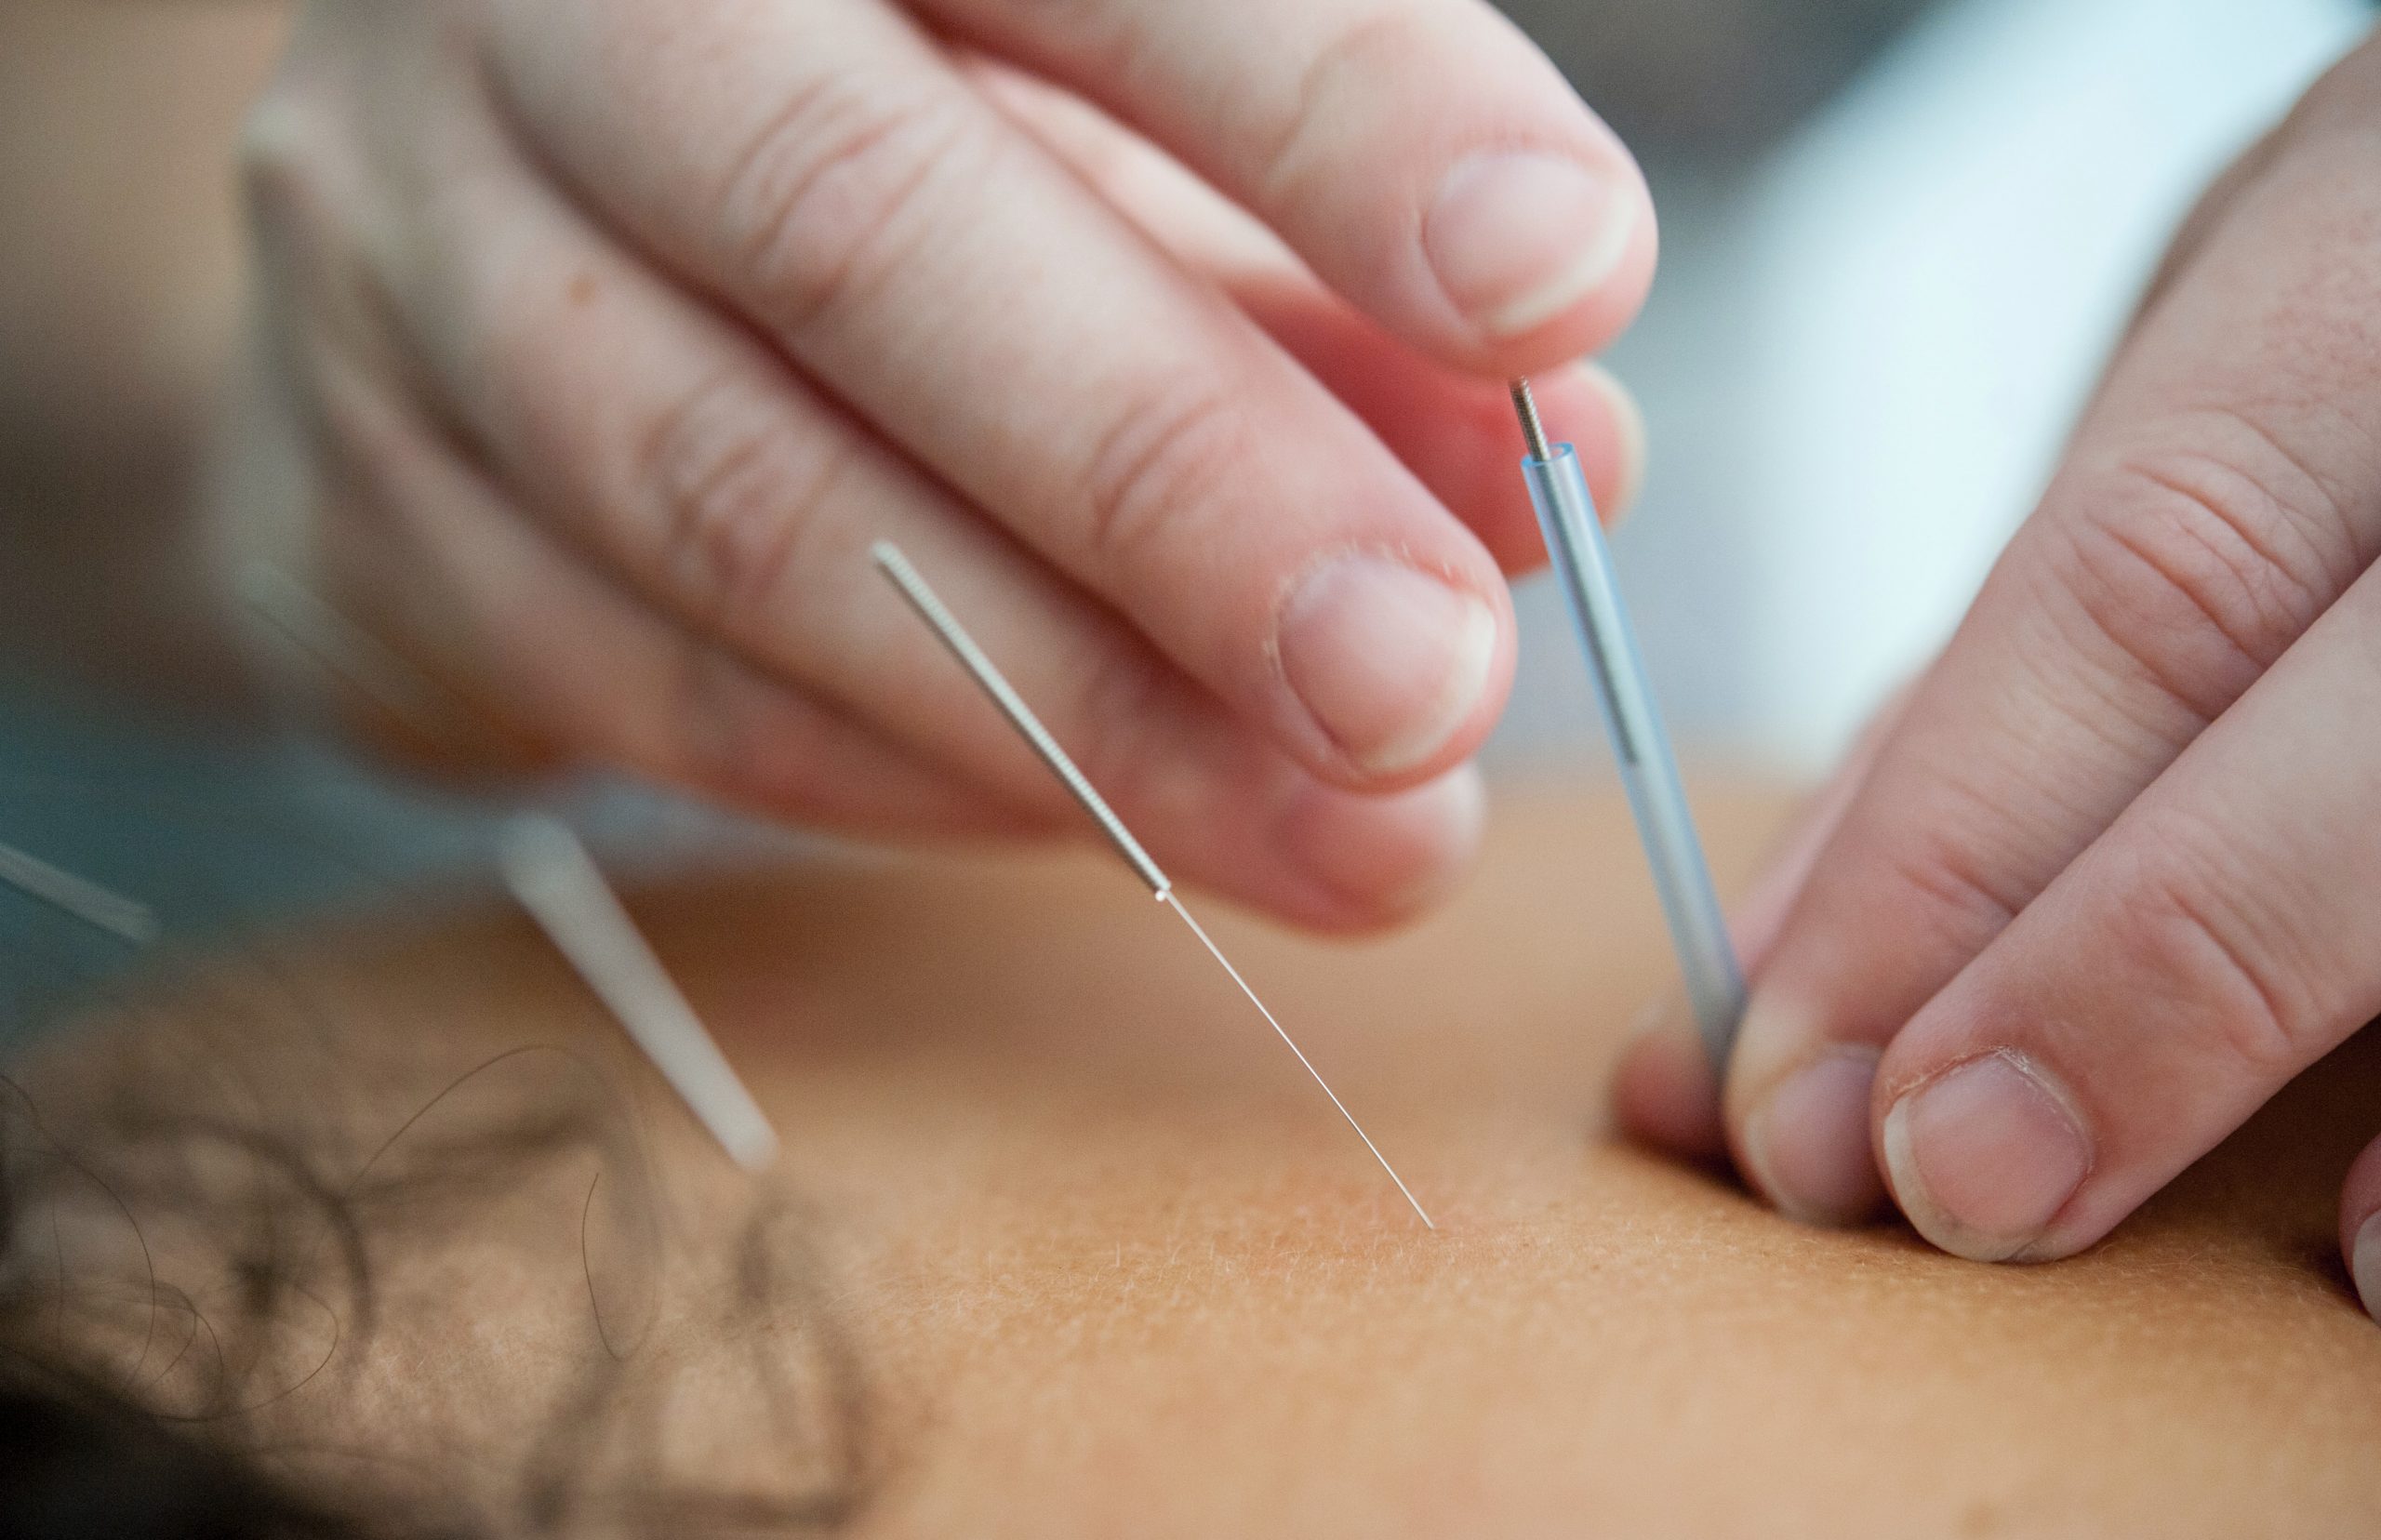 Harborne Physiotherapy And Acupuncture Clinic Is One Of The Very Few West Midlands Physiotherapy Treatment Centers To Offer A Specialist Pregnancy, Publish Natal & Womens Health Physiotherapy Service